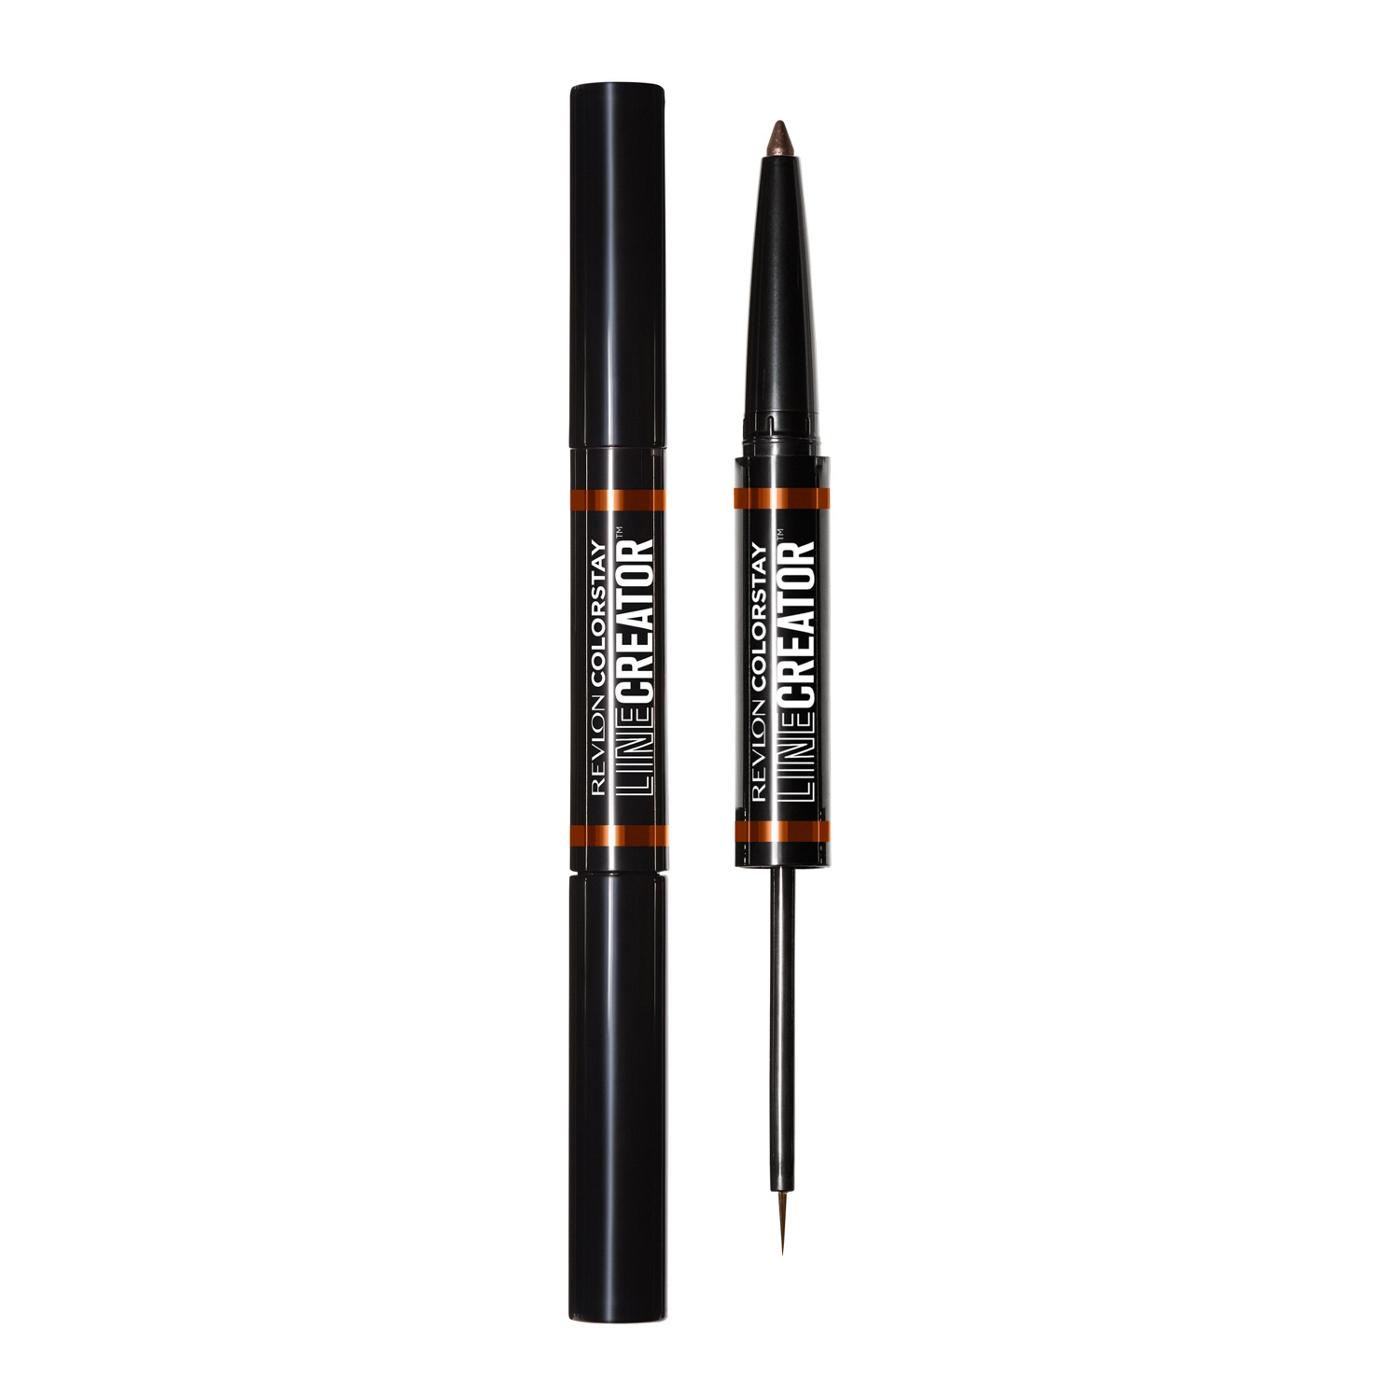 Revlon Colorstay Line Creator Double Ended Liner, Leathrcrft; image 1 of 3